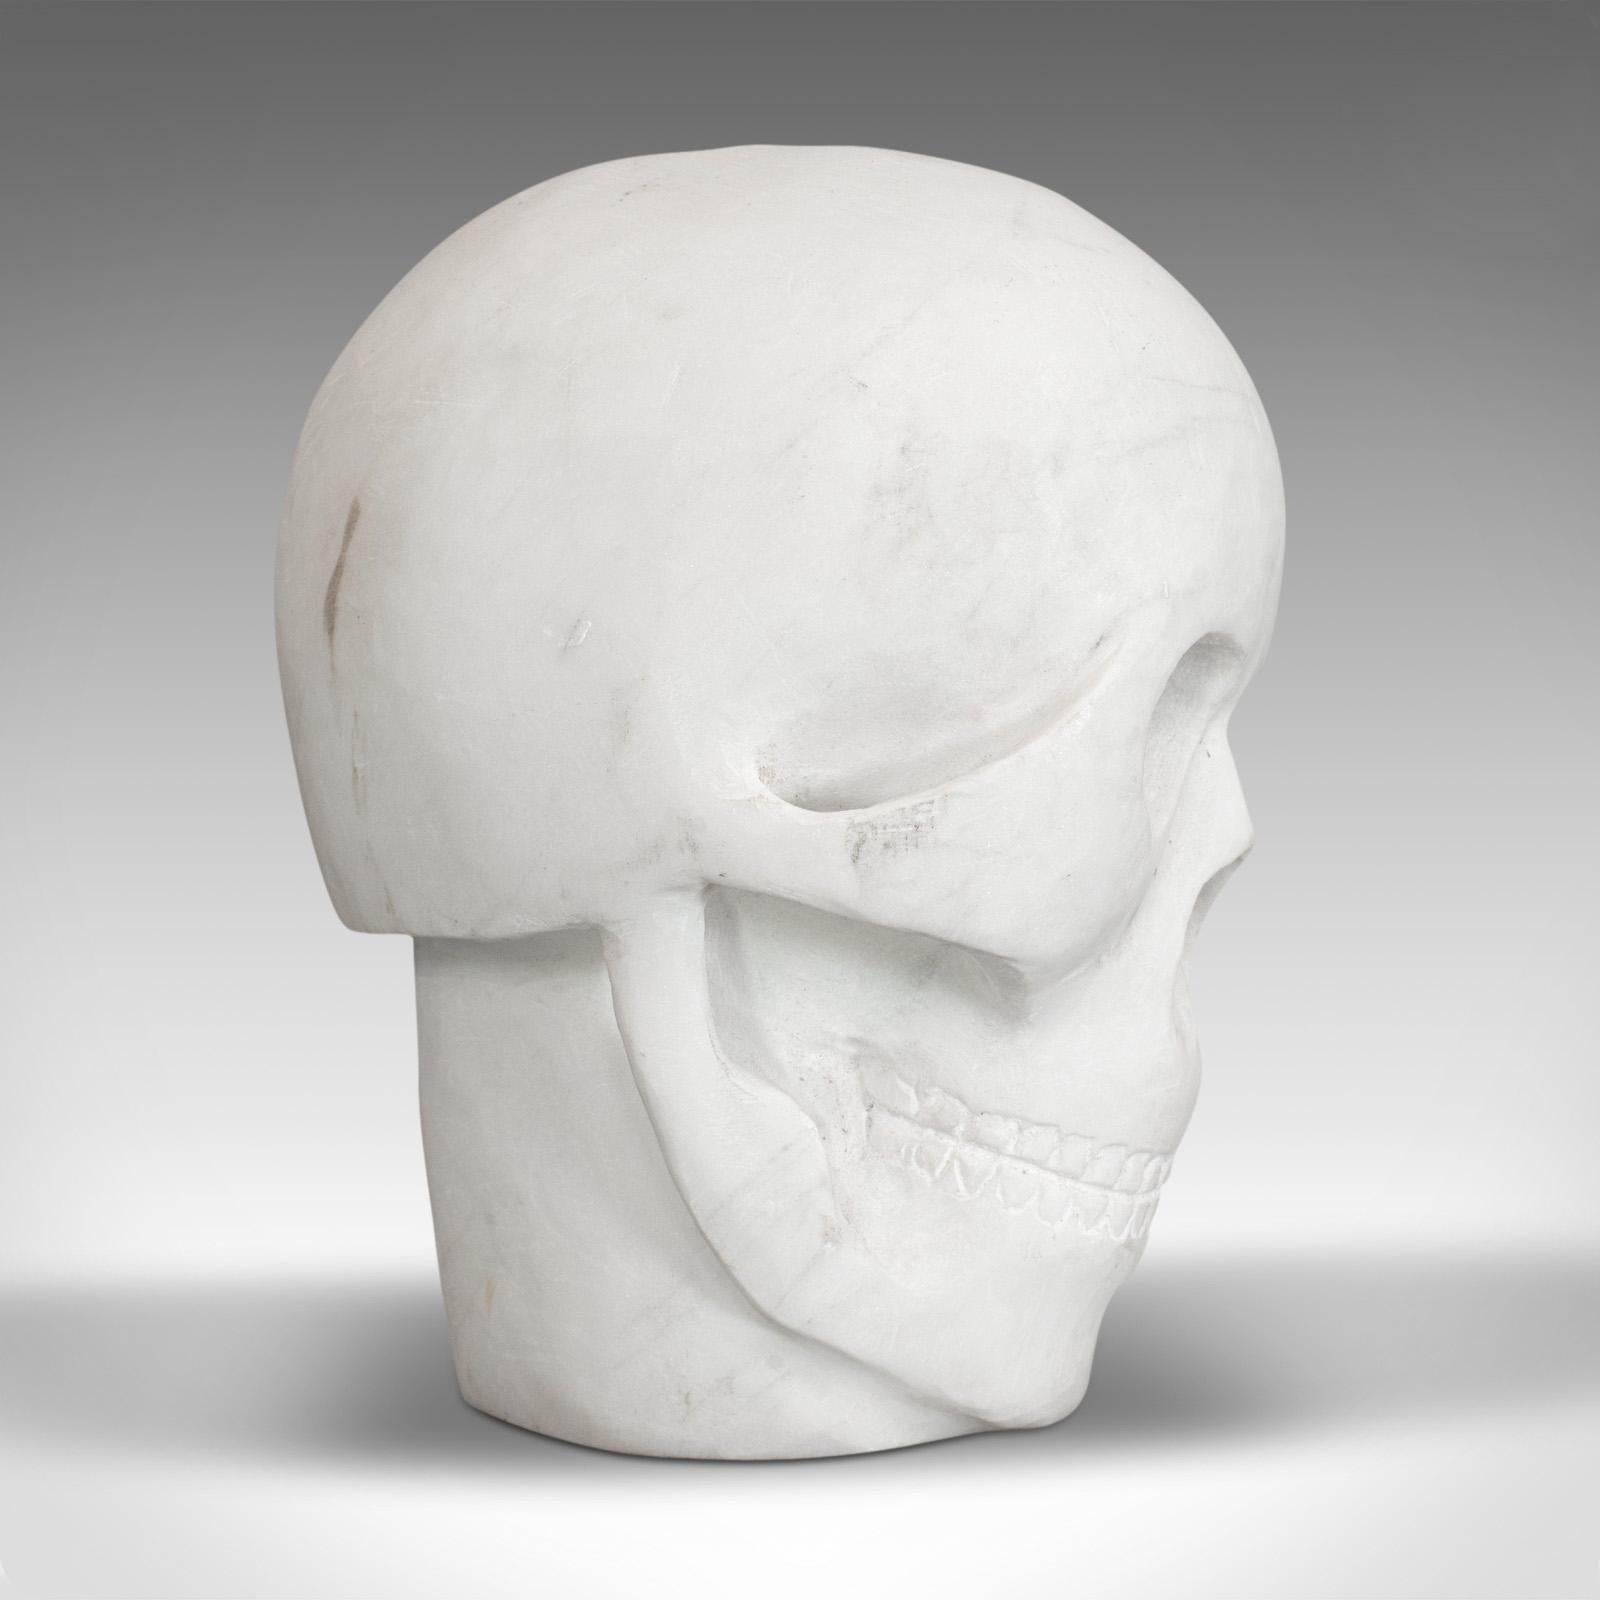 20th Century Vintage Decorative Skull, English, White Marble, Desk, Ornament, Paperweight For Sale